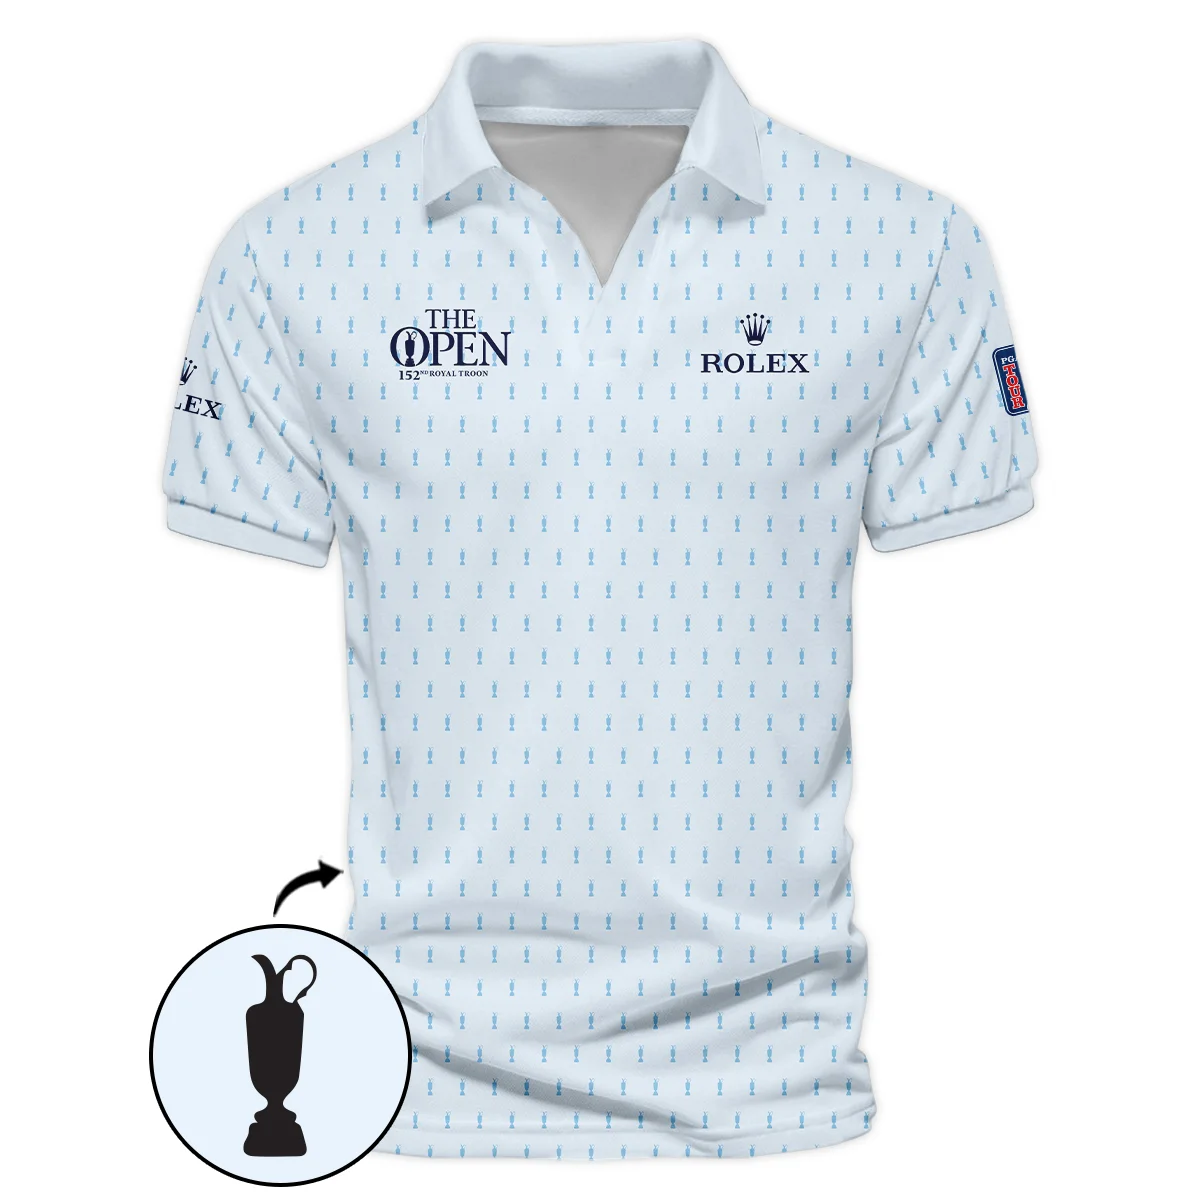 Golf Sport Light Blue Pattern Cup 152nd Open Championship Rolex Vneck Polo Shirt All Over Prints  QTTOP160624A01ROXZVPL